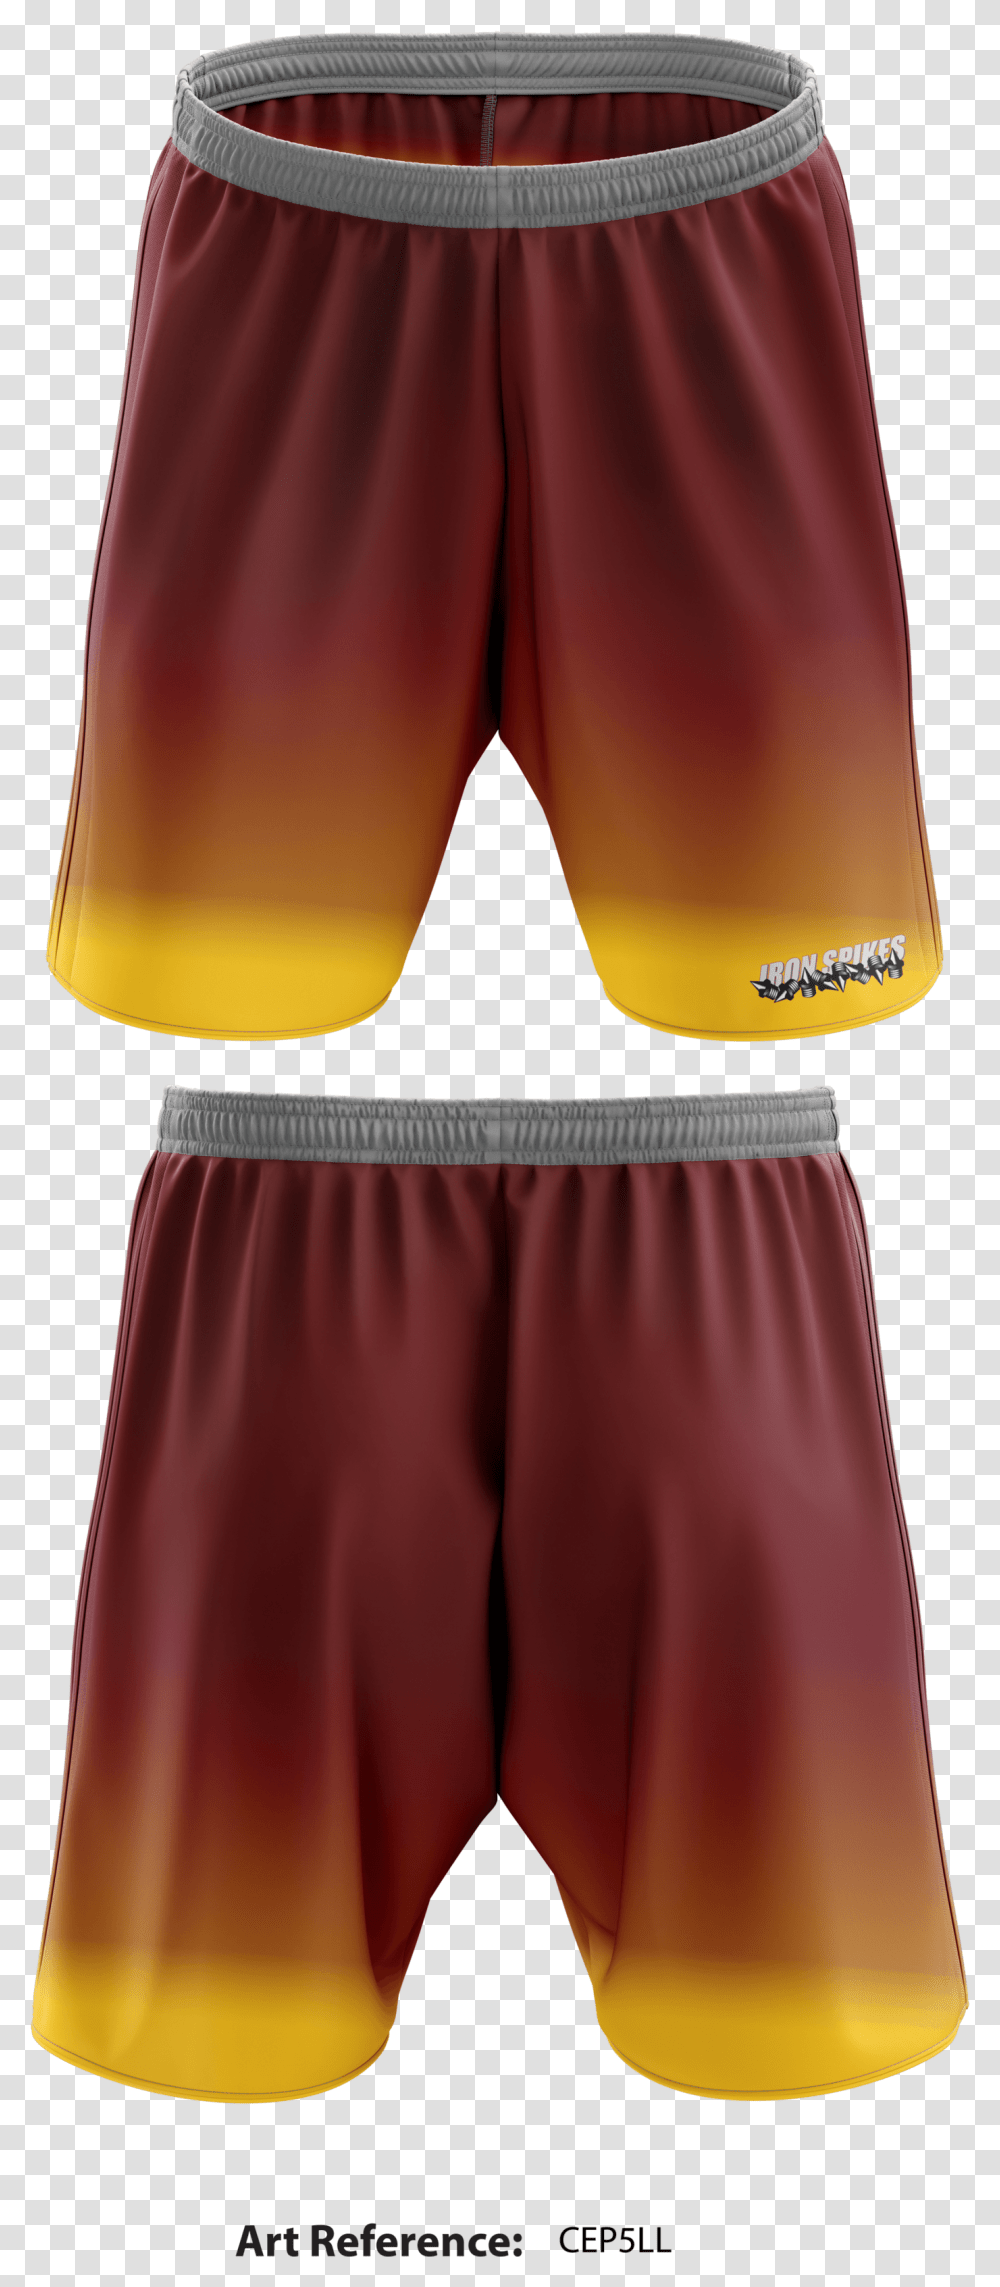 Iron Spikes Track And Field Club Athletic Shorts Underpants, Apparel, Underwear, Accessories Transparent Png